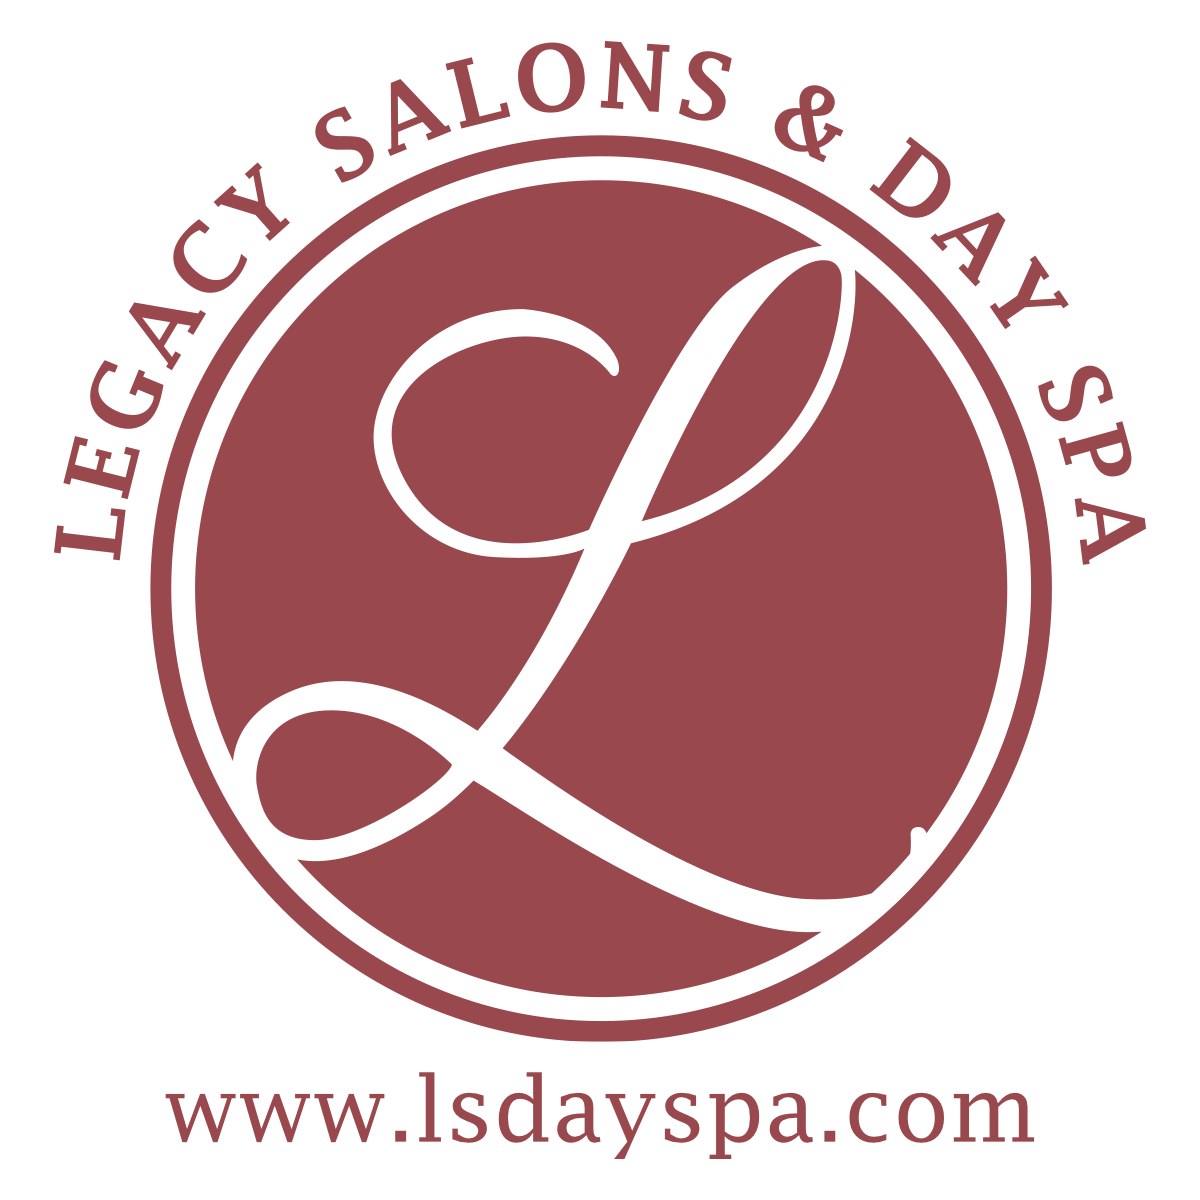 Legacy Salons and Day Spa